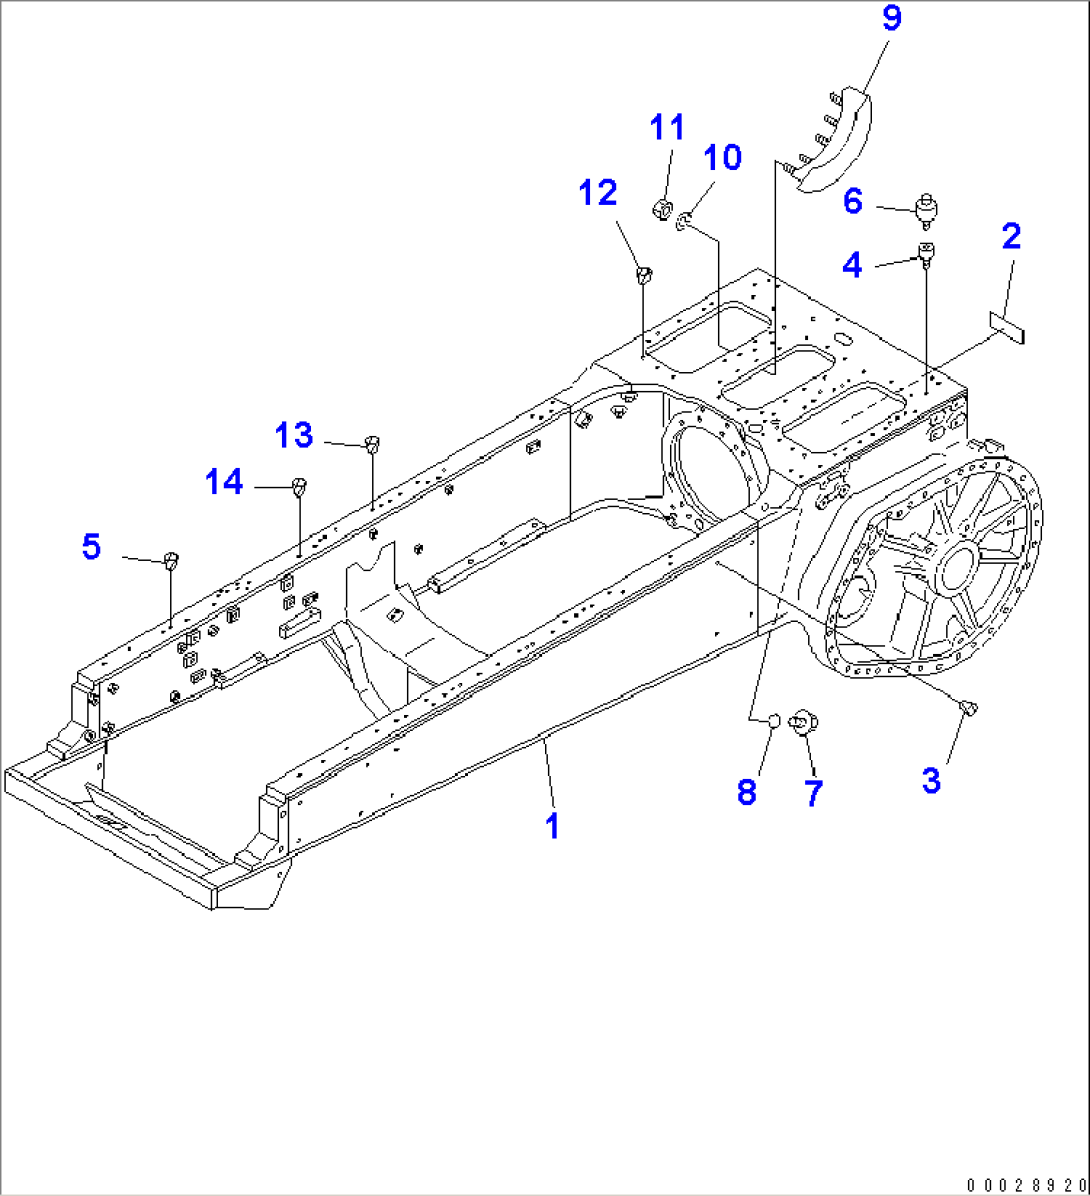 STEERING CASE AND MAIN FRAME (FOR SAUDI ARABIA)